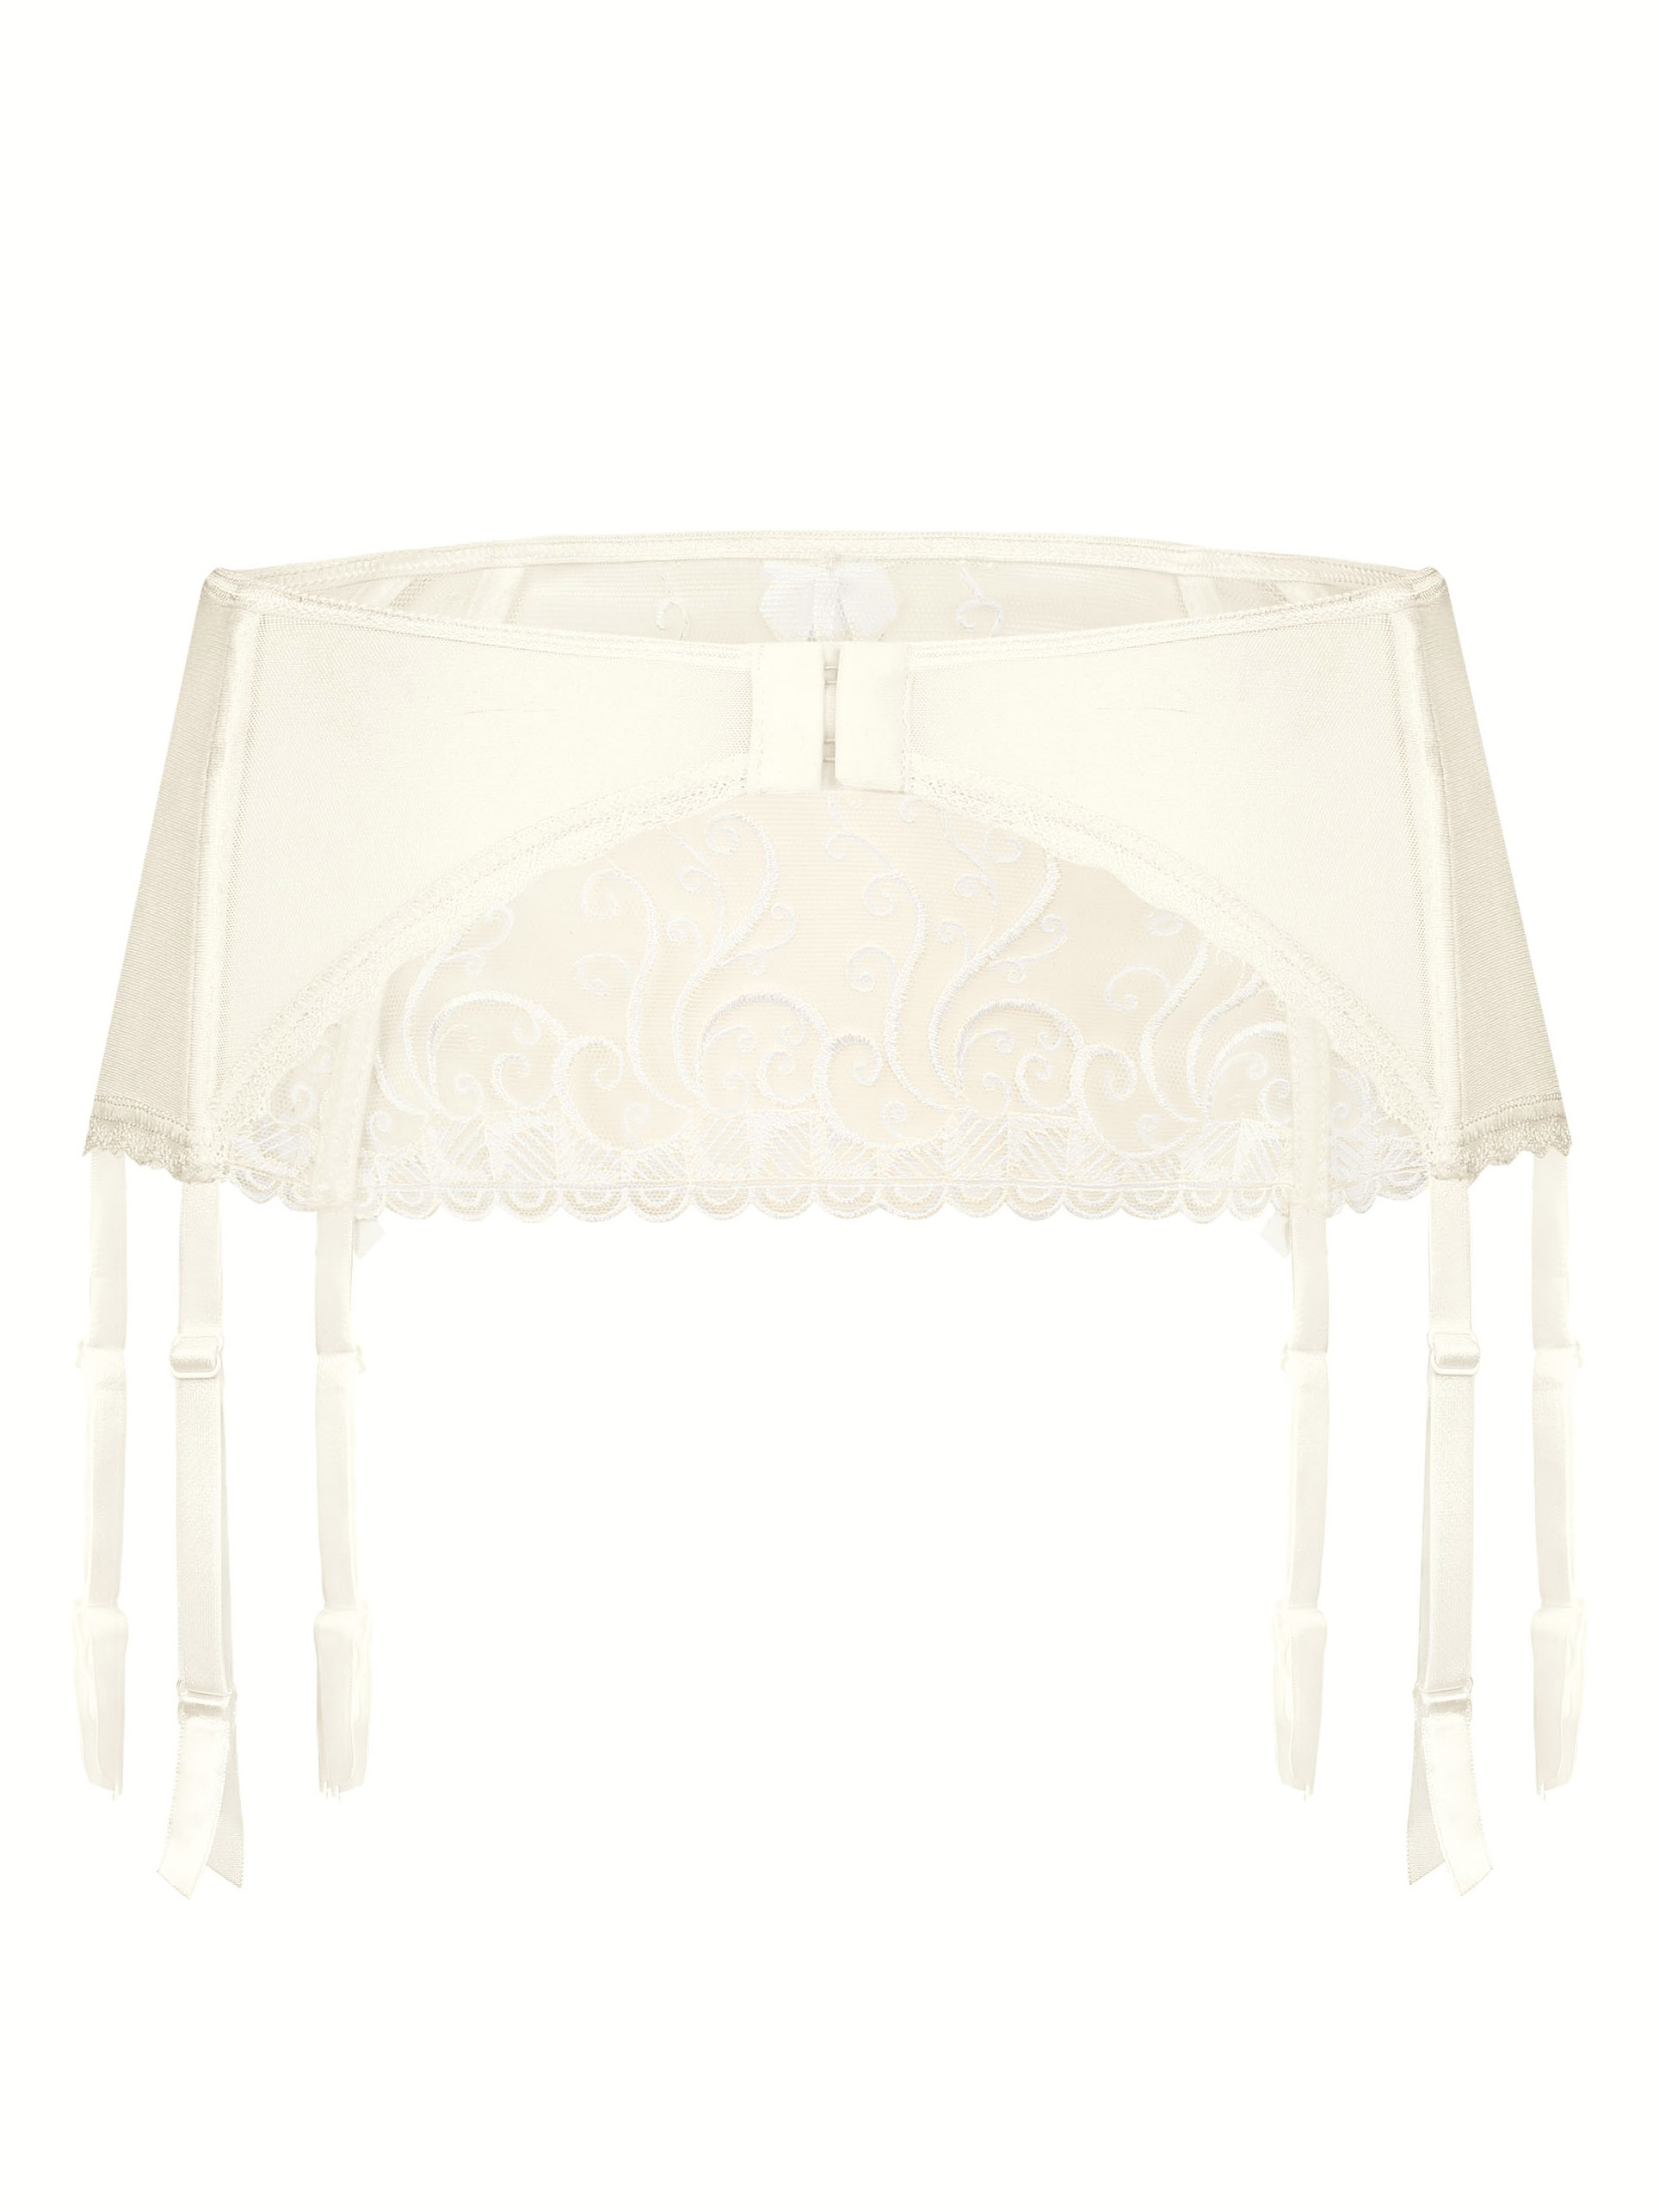 Lace garter belt with sheer tulle Roza Anuk #3